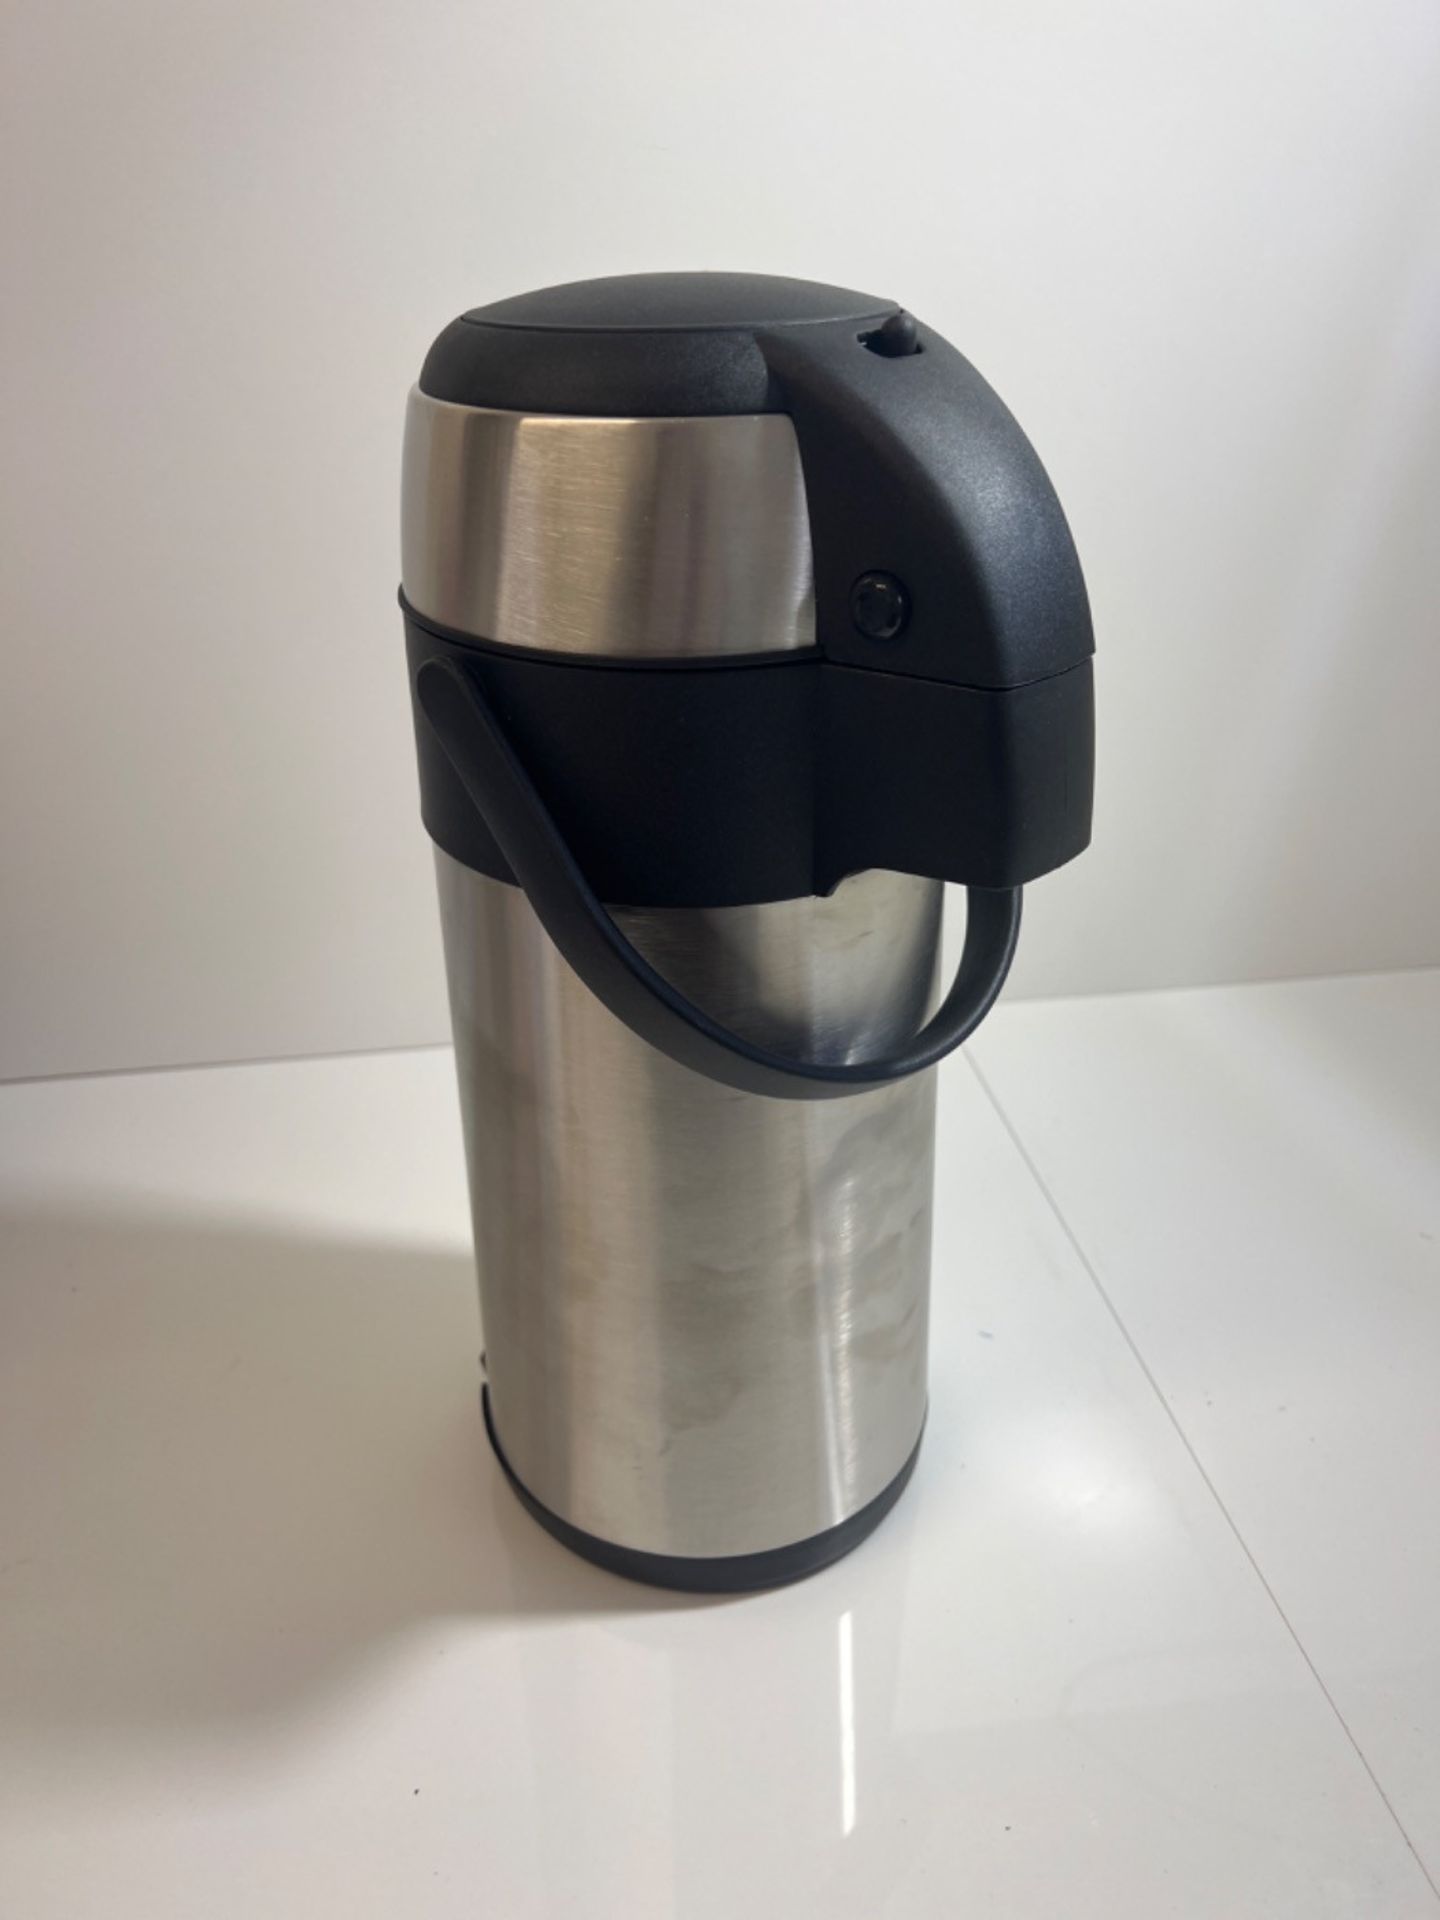 Zodiac ZODC10007-3 Airpot Stainless Steel 3.0 Ltr - Image 2 of 3